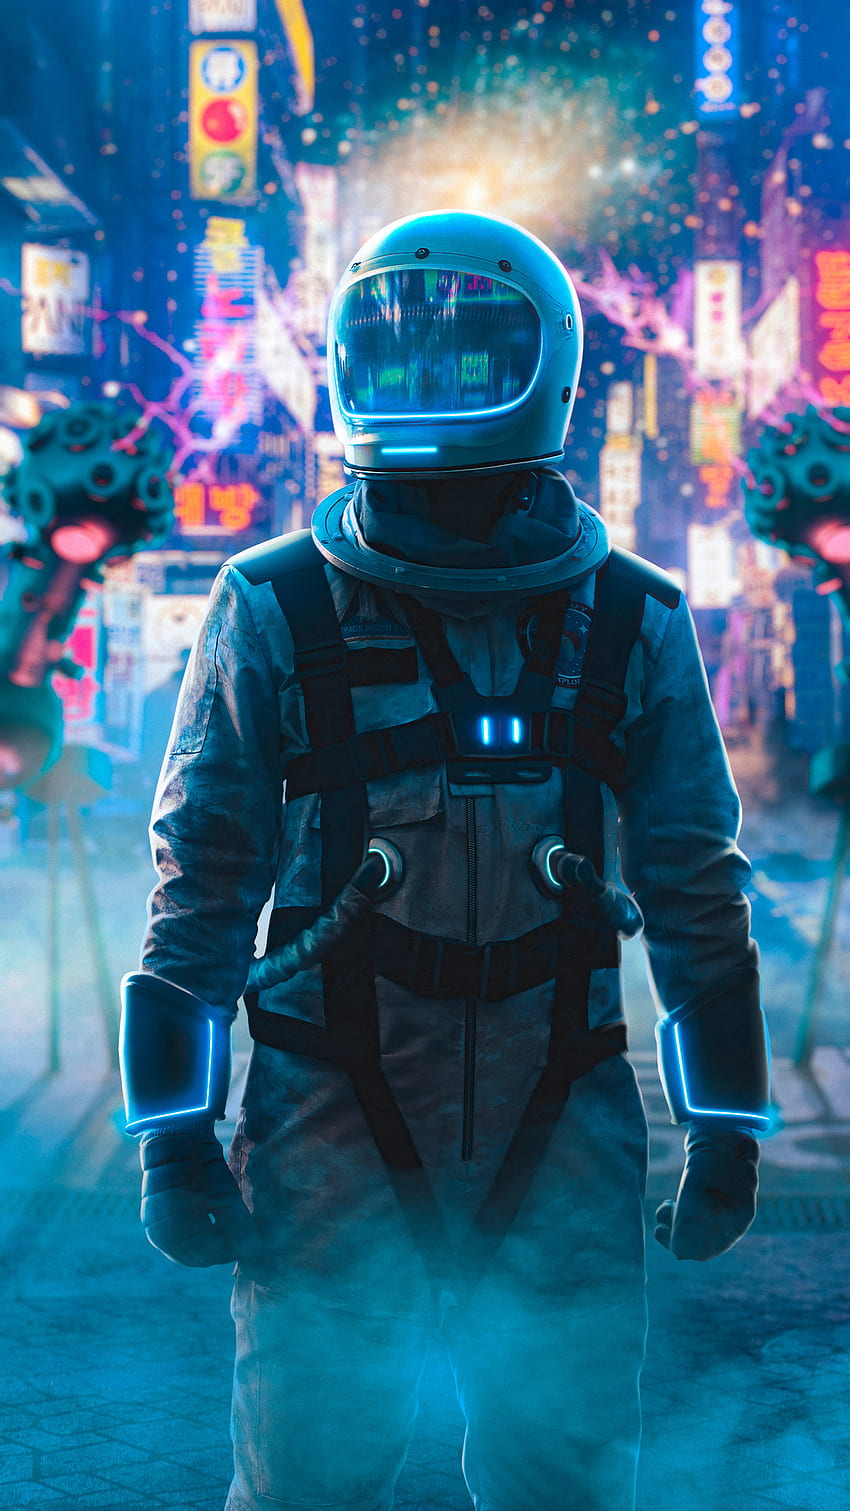 Astronaut Alone In Neon City iPhone 7, 6s, 6 Plus, Pixel xl , One Plus 3, 3t, 5 , , Background, and, 宇宙飛行士ネオンライト HD電話の壁紙